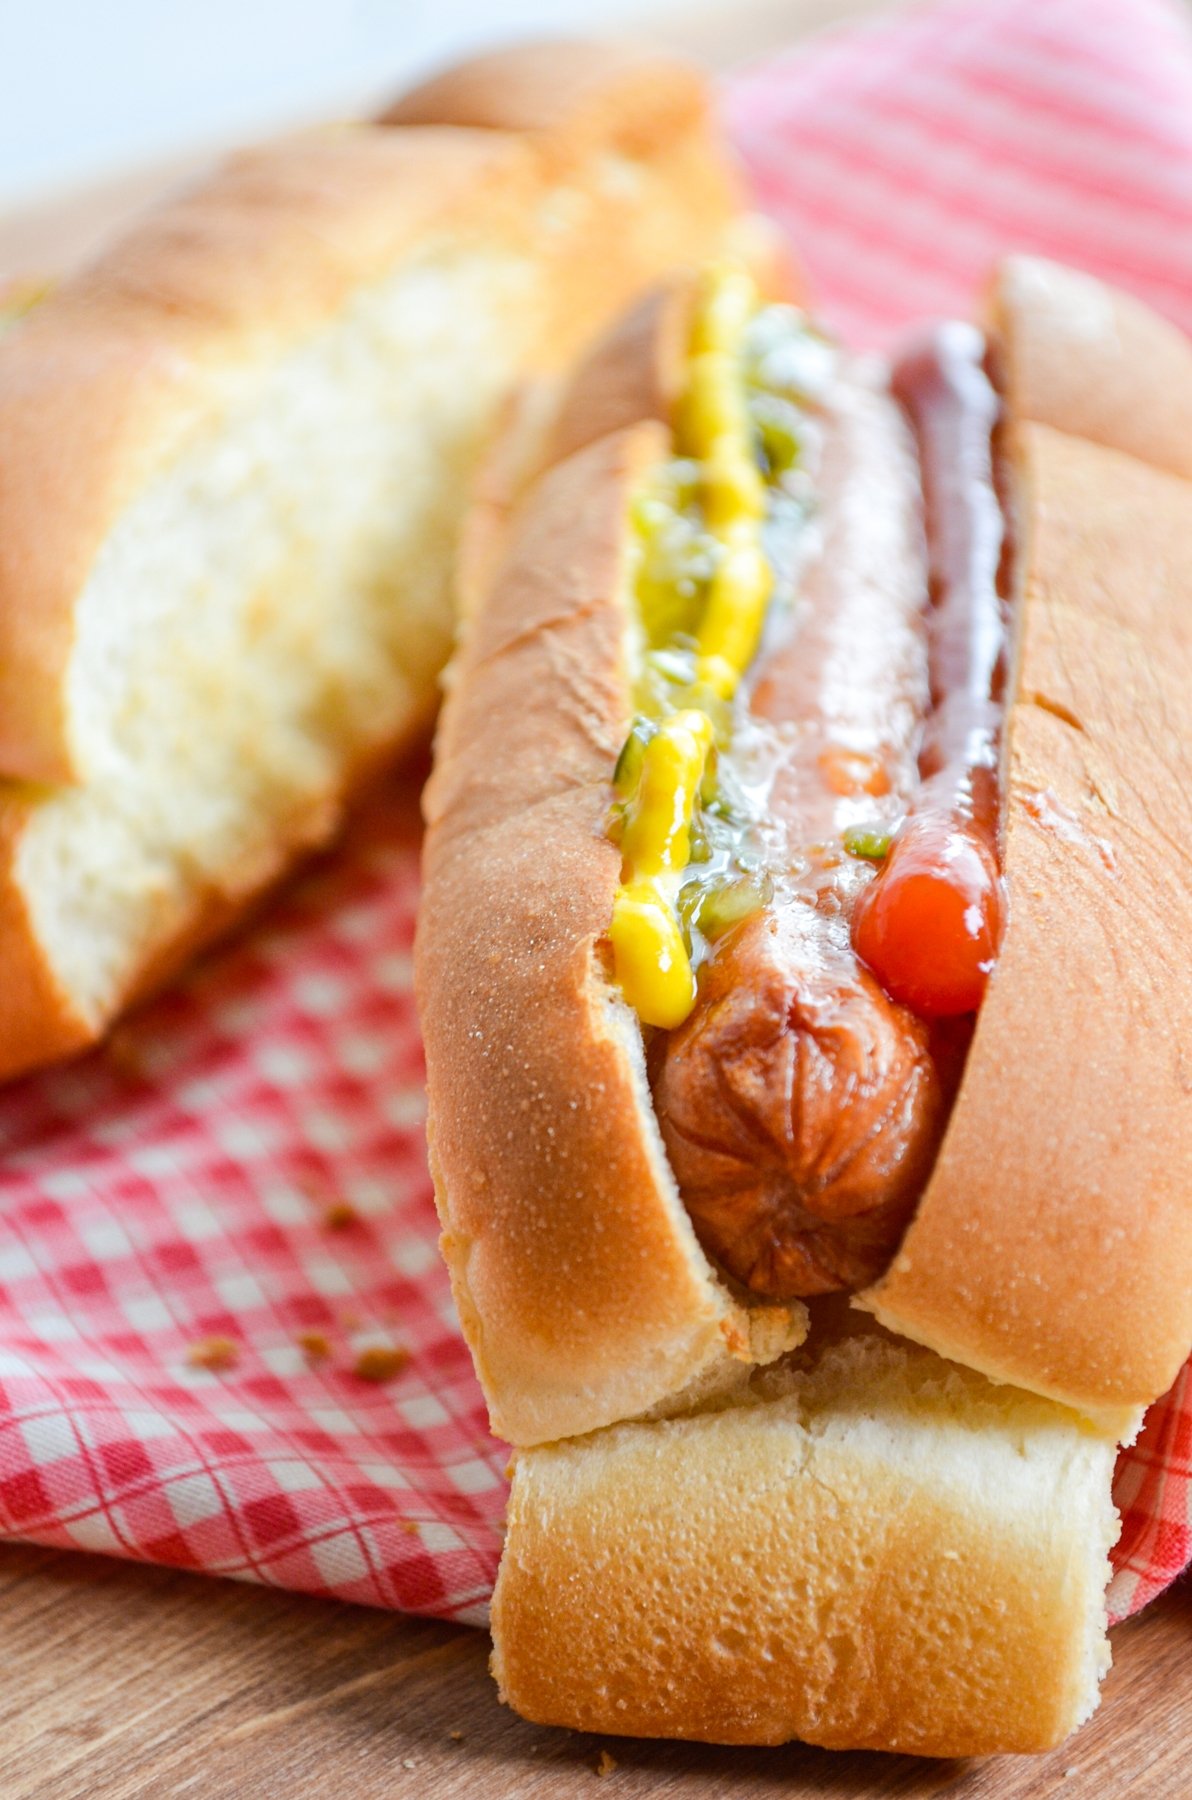 A classic hot dog prepared with ketchup, mustard, and relish.